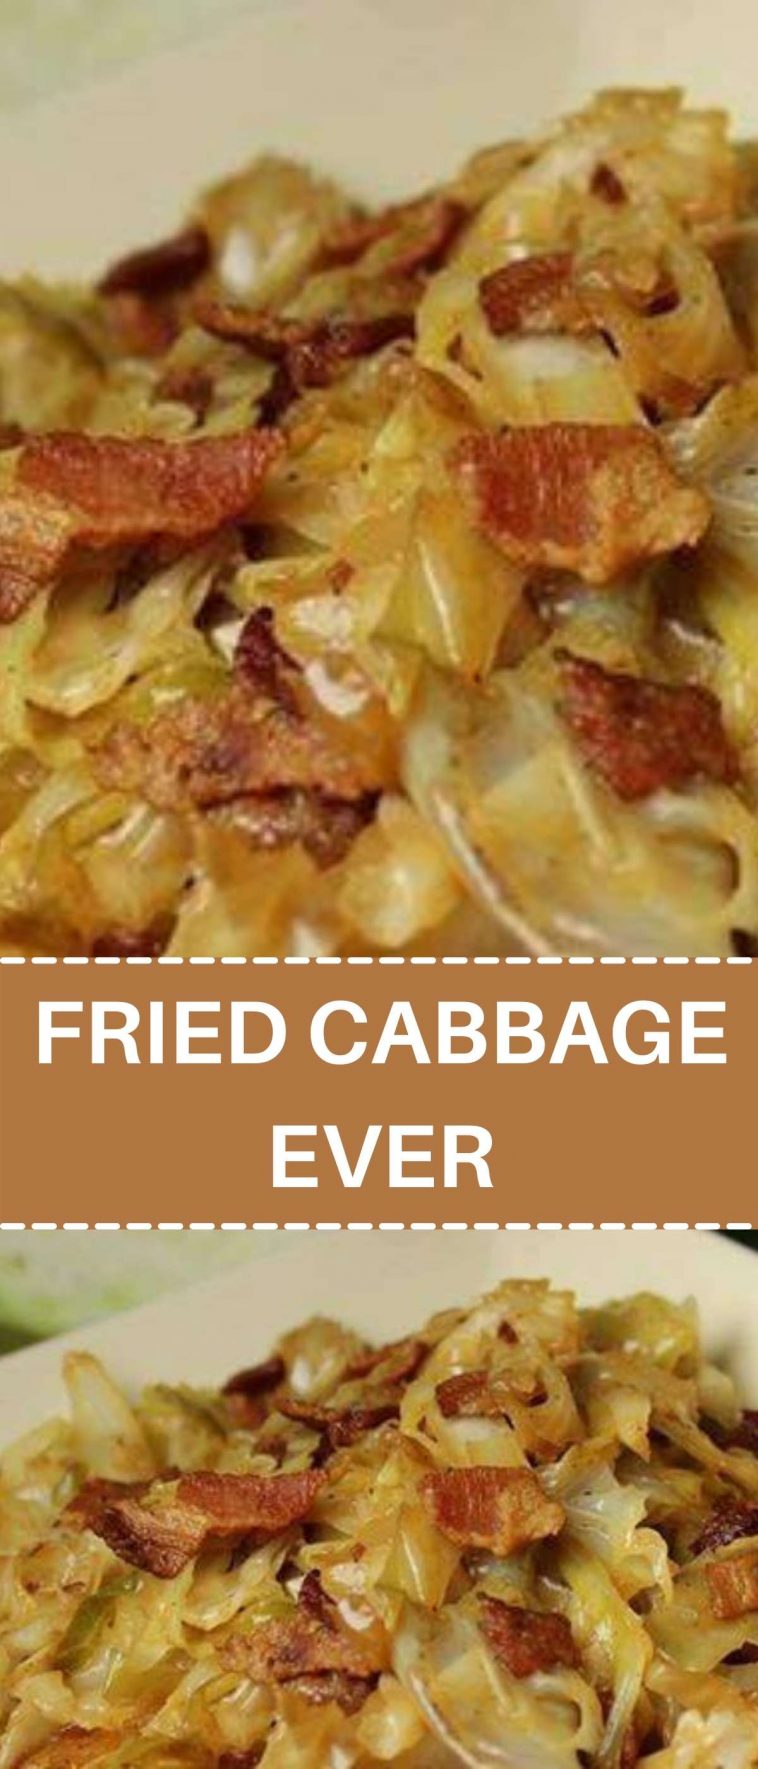 FRIED CABBAGE EVER